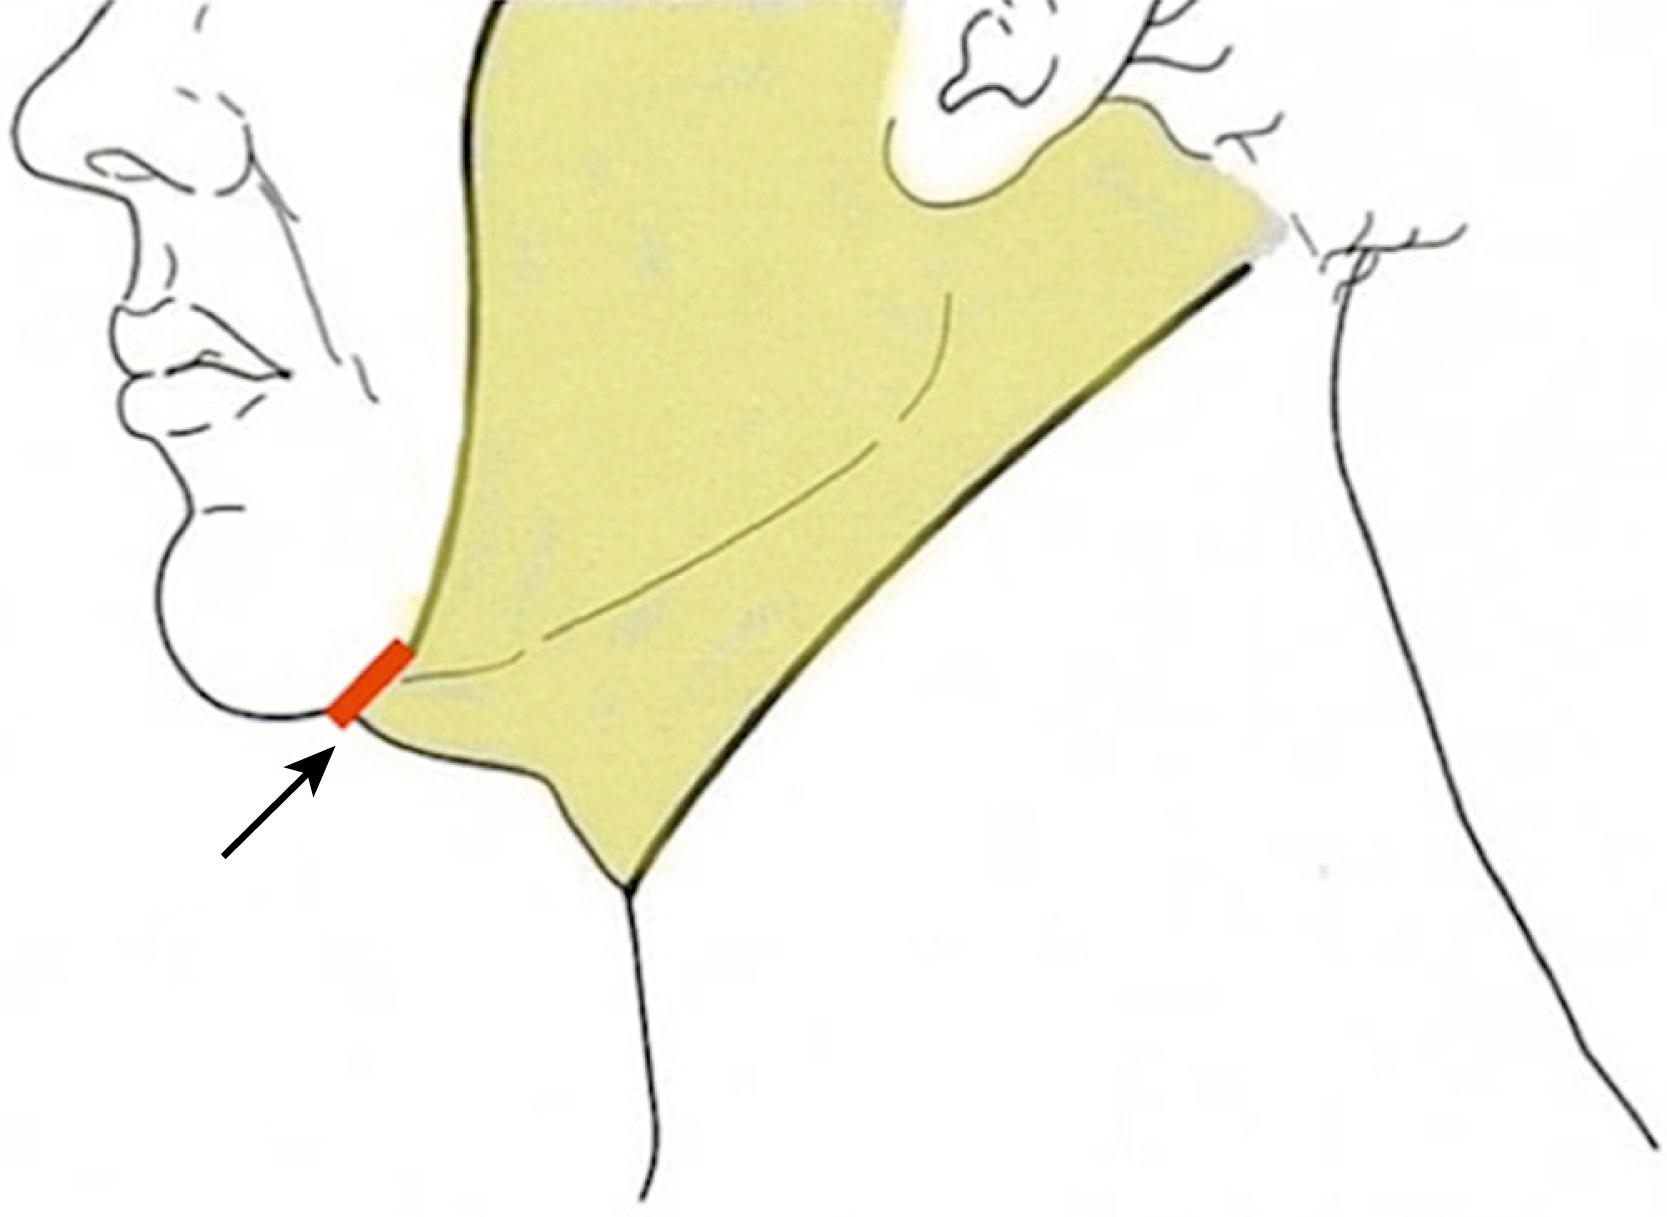 Fig. 67.13, Traditional, but incorrect plan for the submental incision. The incision should not be placed directly along the submental crease ( arrow ) as this will reinforce the submental retaining ligaments and accentuate the “double chin” appearance. Note that typical plan of skin undermining (yellow area) also promotes a “double chin” appearance because the crease is not undermined, retaining ligaments are not released, and the fat of the chin and the neck cannot be readily blended to create a smooth transition between them.